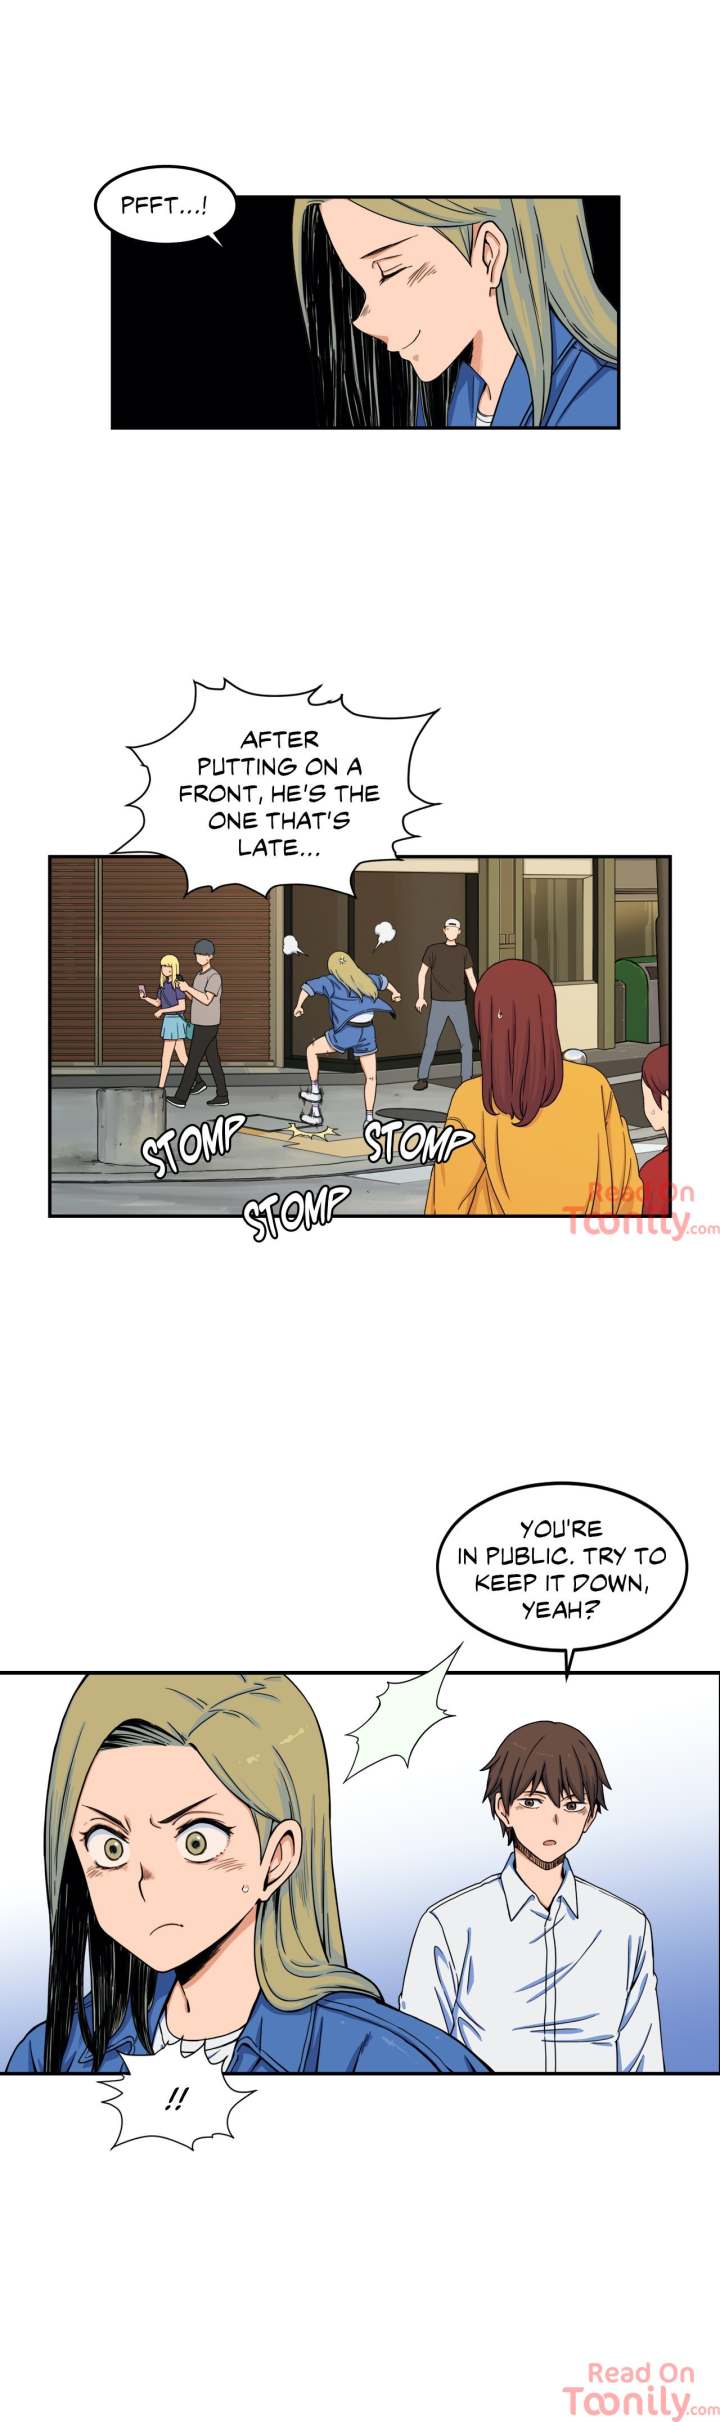 Head Over Heels - Chapter 7 Page 6